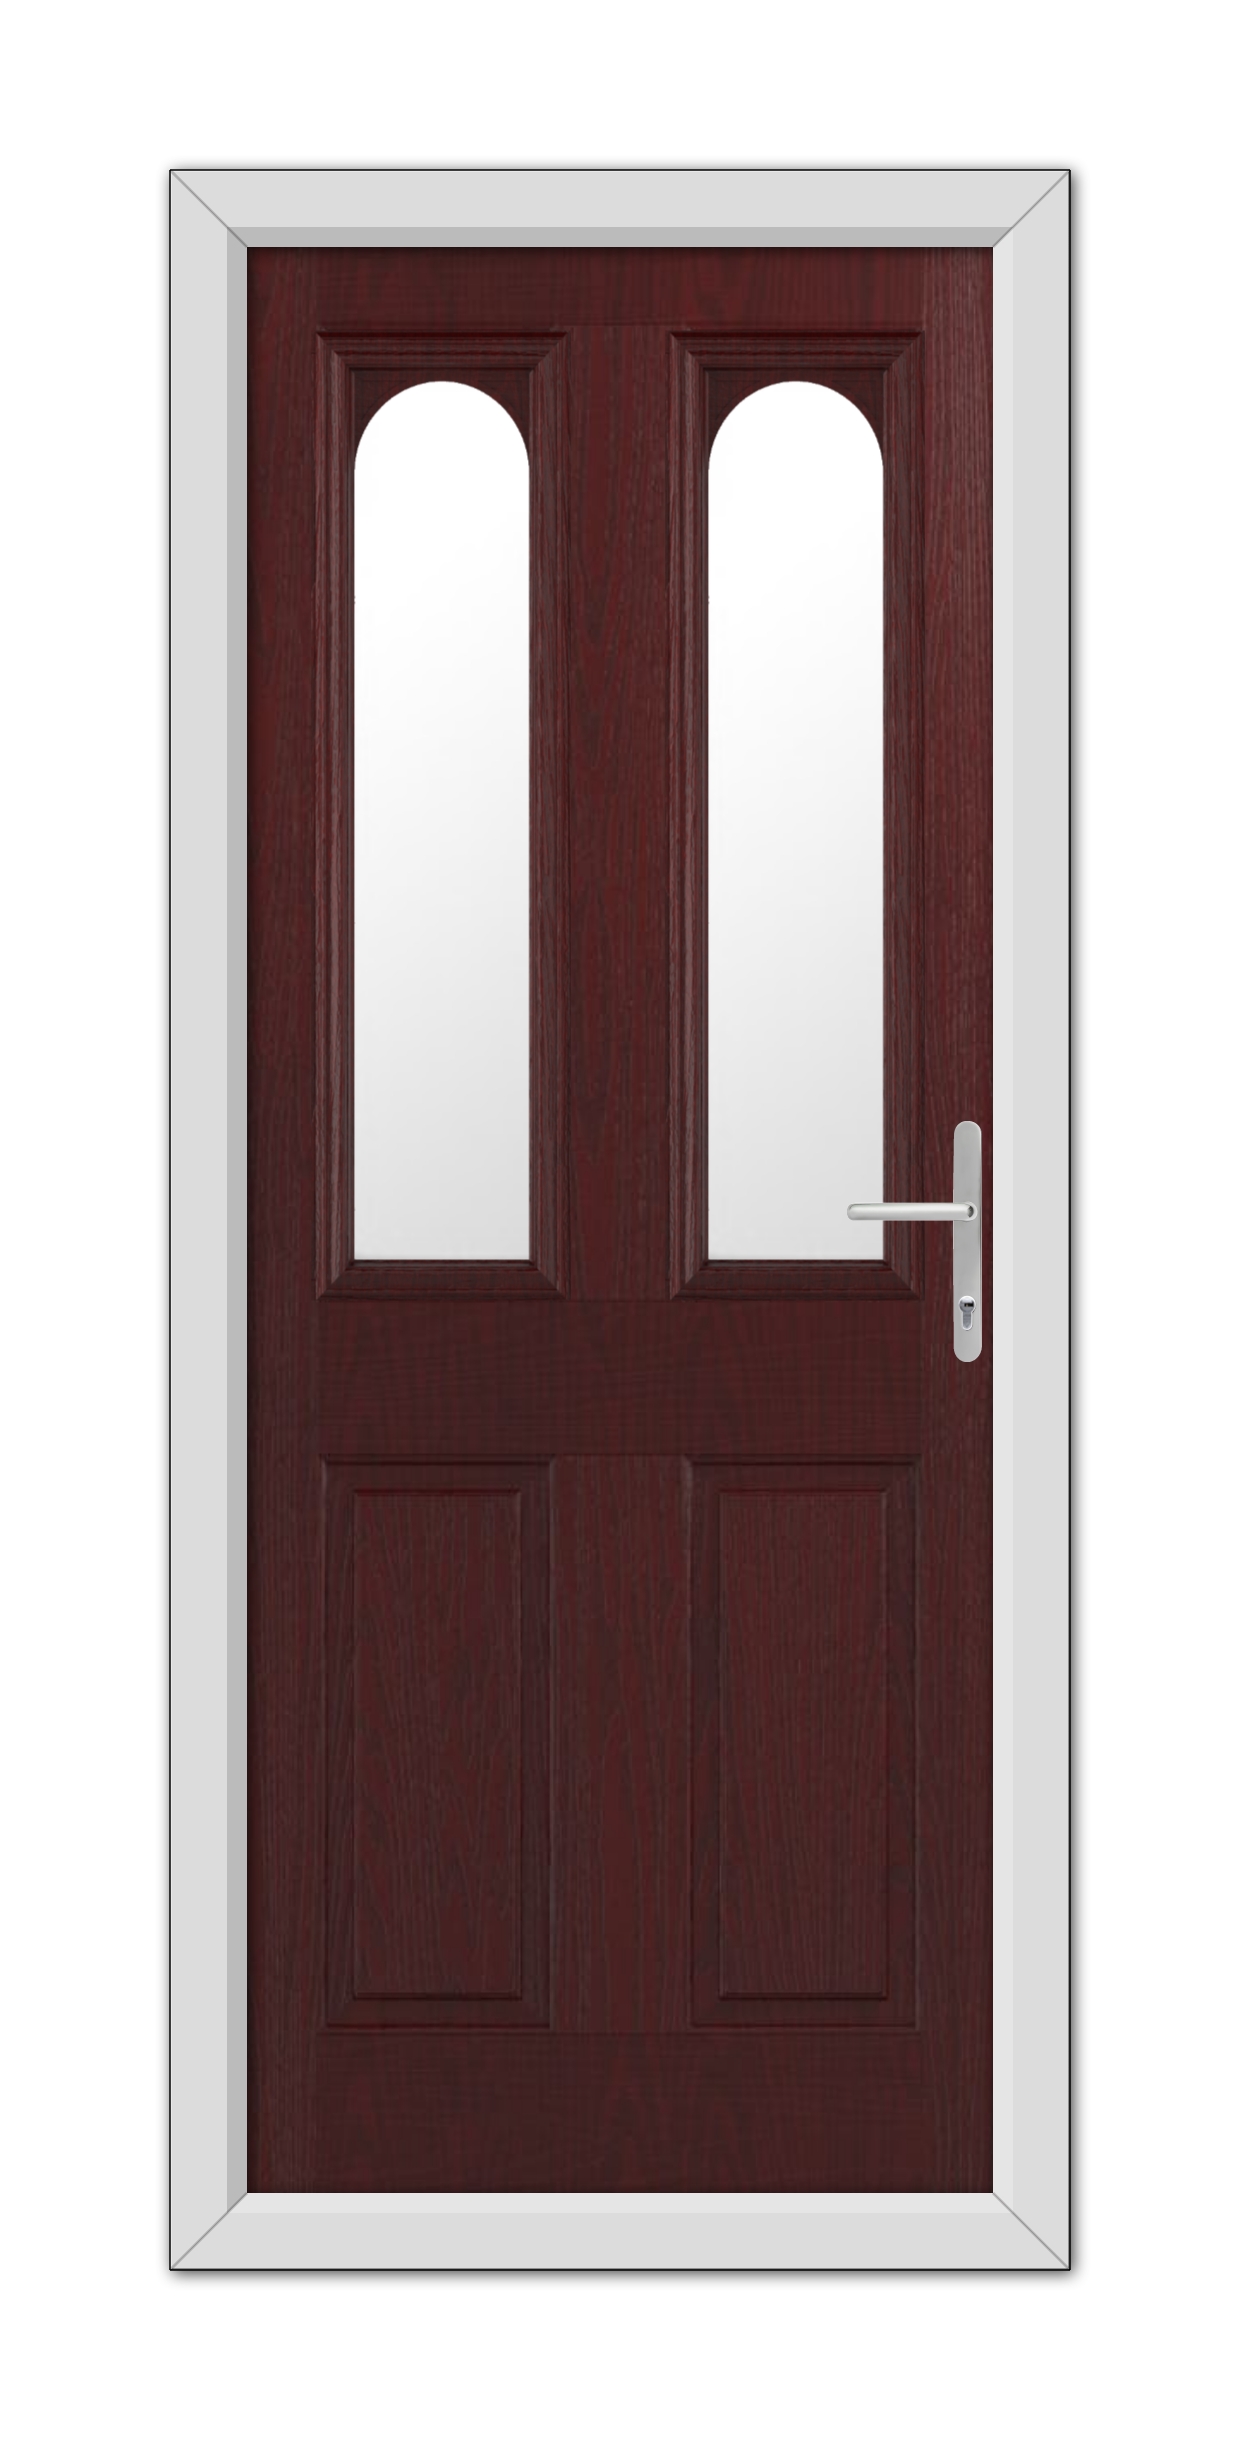 A modern Rosewood Elmhurst Composite Door 48mm Timber Core with vertical rectangular windows and a white handle, set in a white frame.